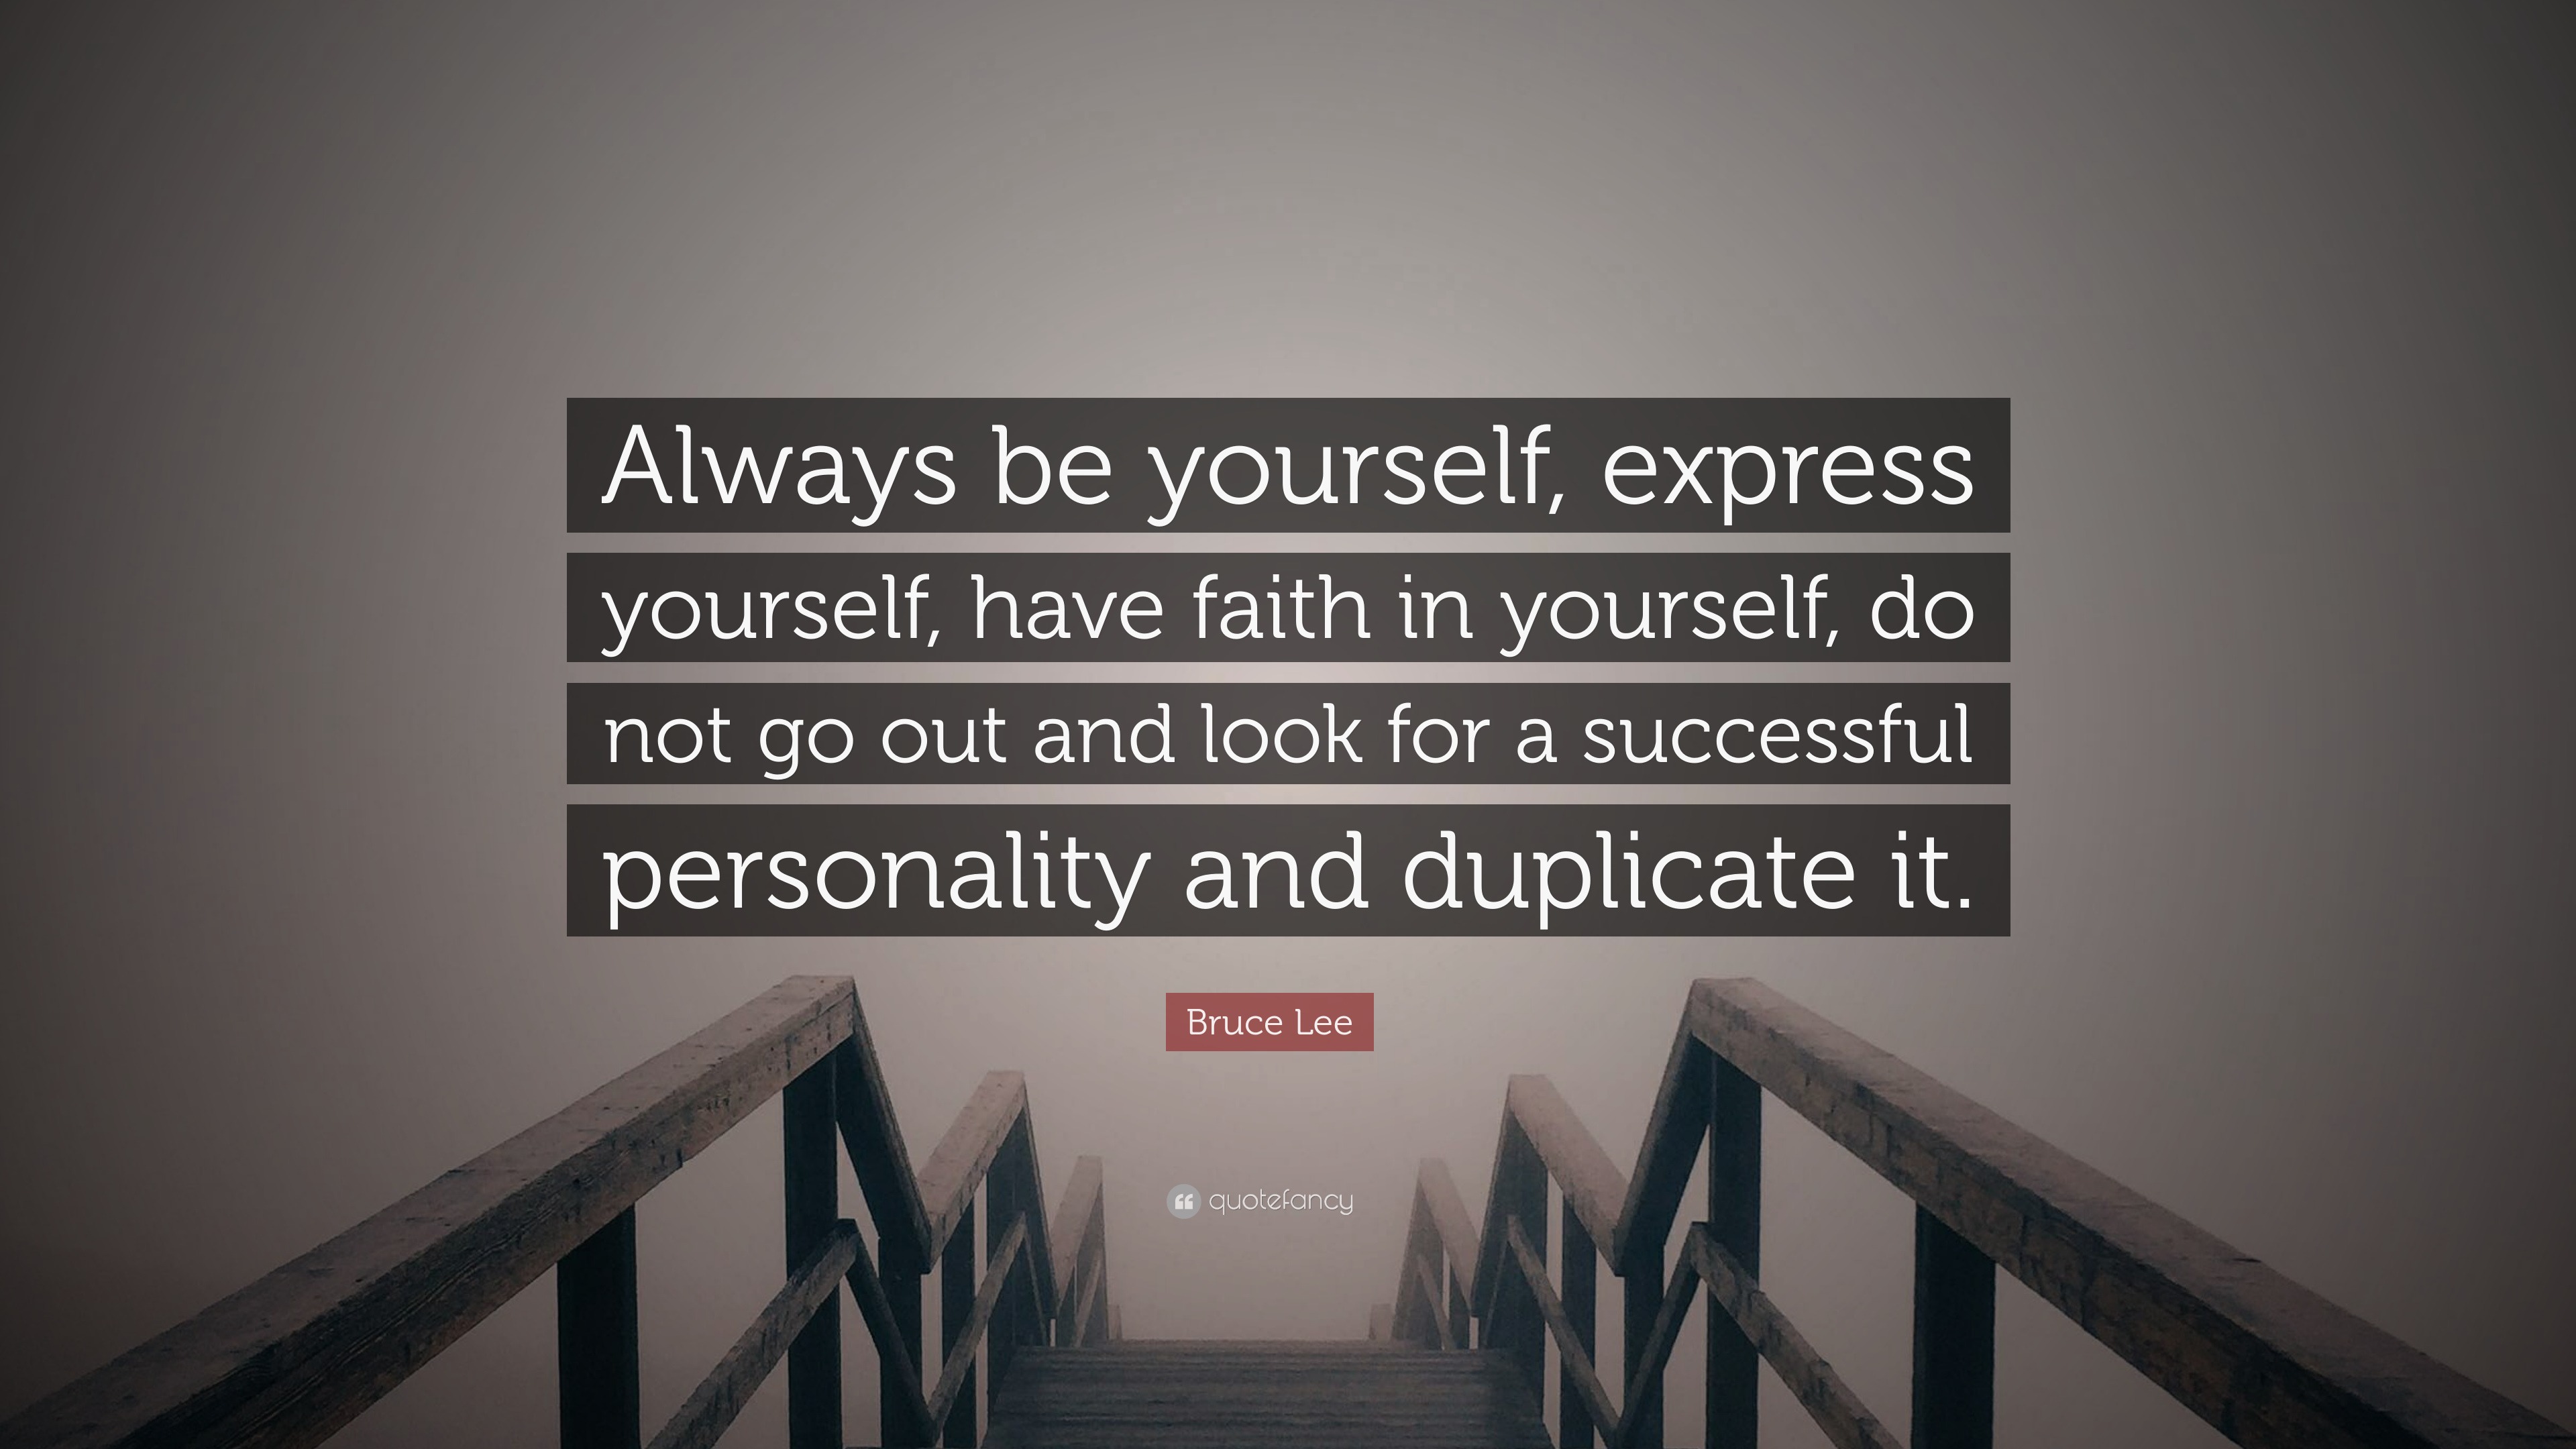 Bruce Lee Quote: “Always be yourself, express yourself, have faith in  yourself, do not go out and look for a successful personality and du...”